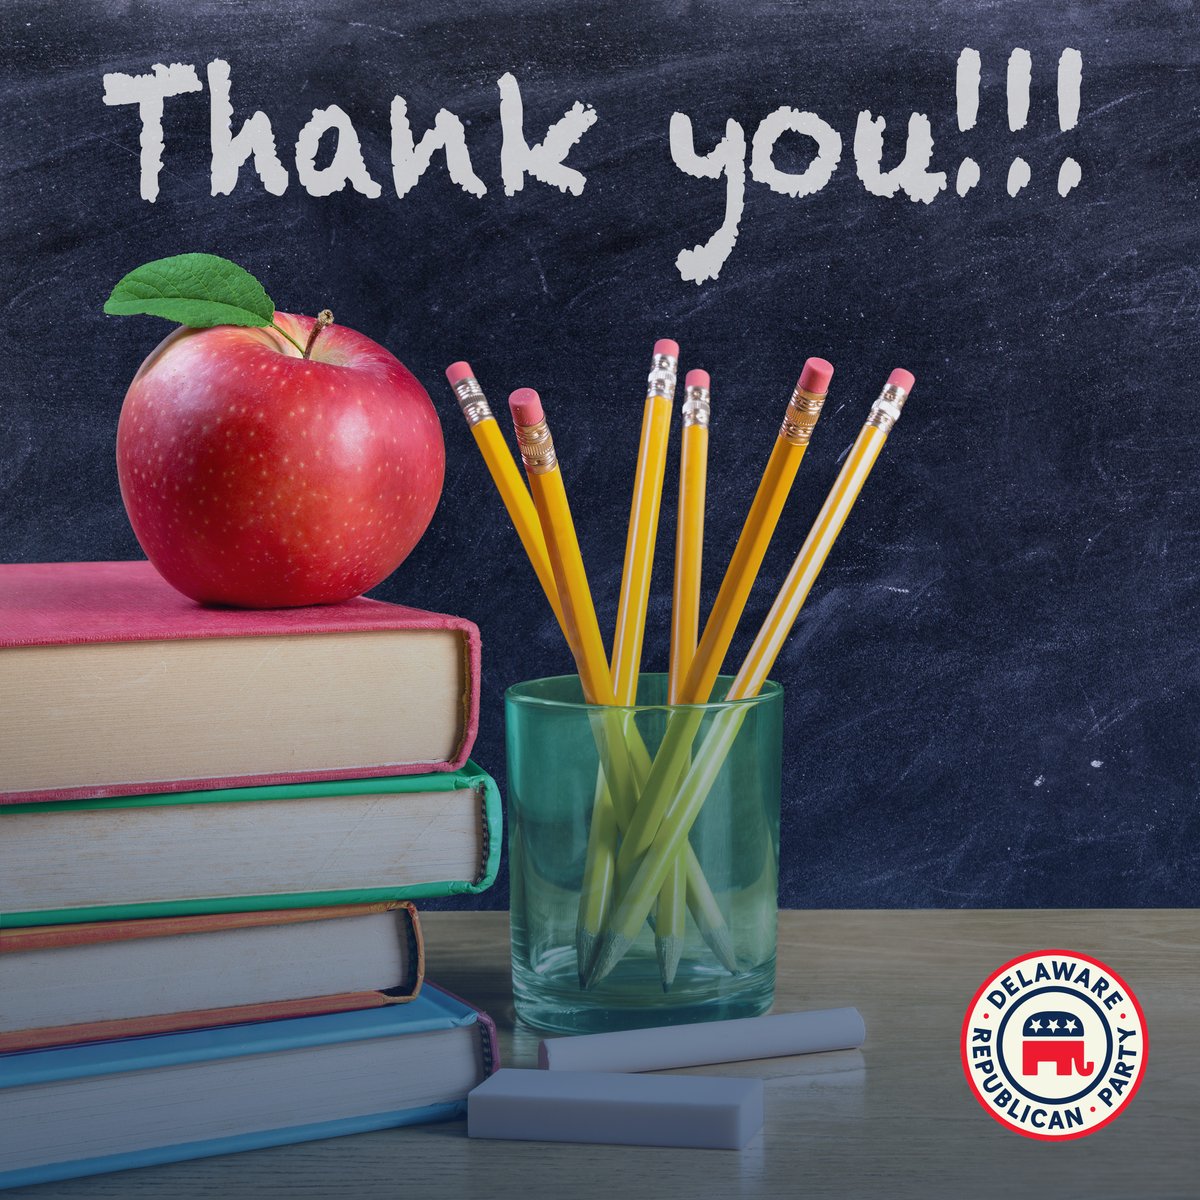 Delaware Celebrates National Education Week! 
This week, we extend our heartfelt appreciation to the incredible team of individuals who make up the backbone of Delaware’s public schools.
#NationalEducationWeek #Gratitude #EducationHeroes